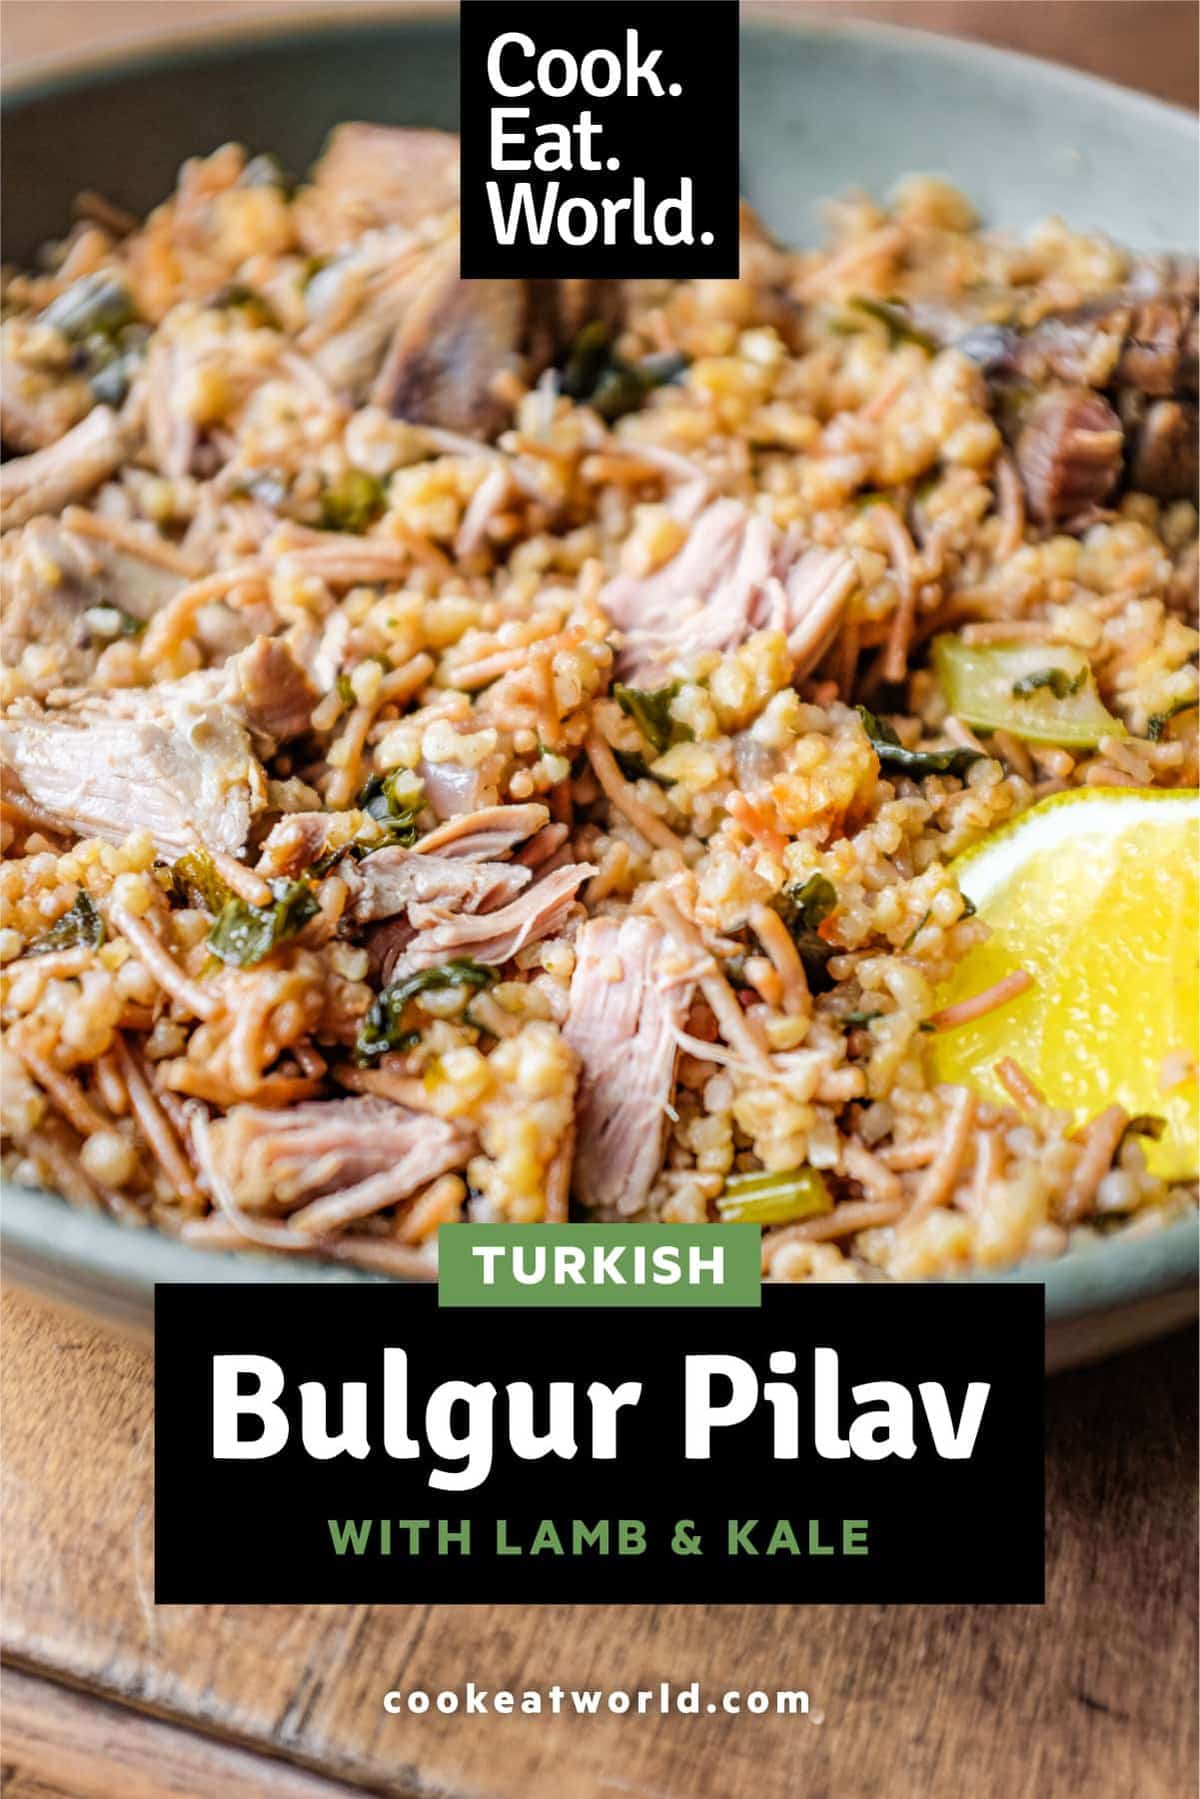 A bowl of Turkish bulgur pilav with a fork and a wedge of lemon.